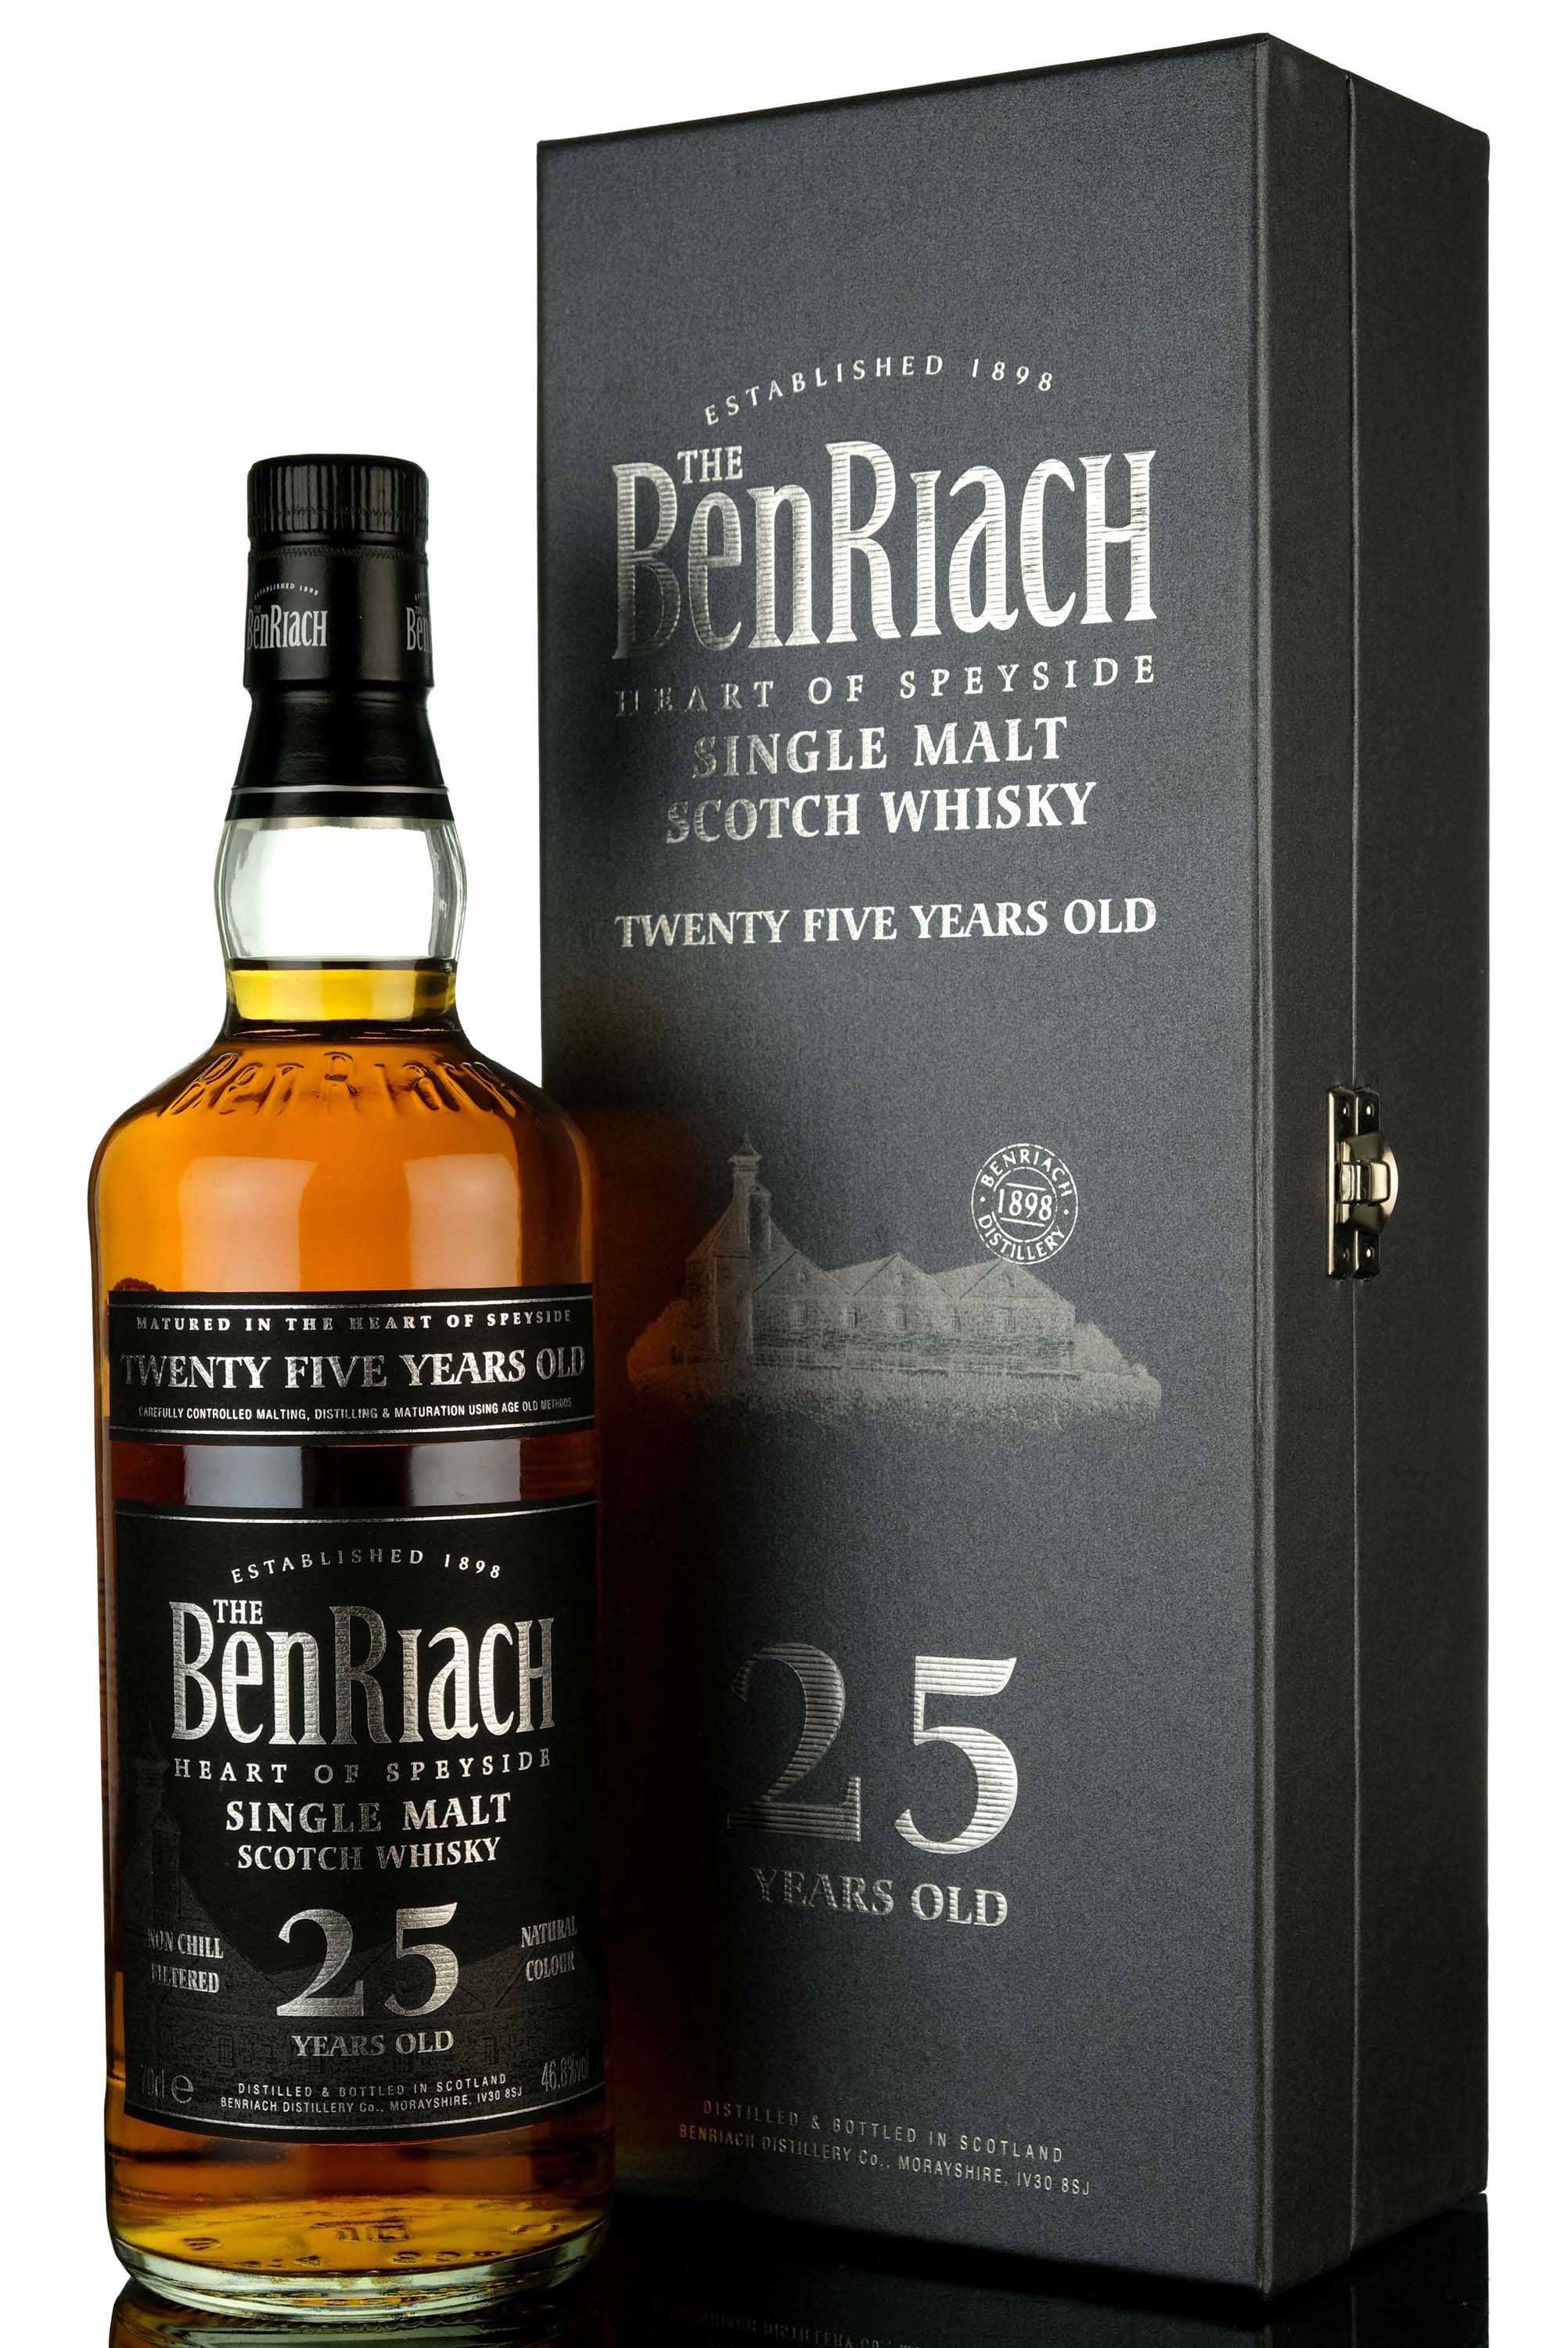 Benriach 25 Year Old - 2019 Release - 46.8%